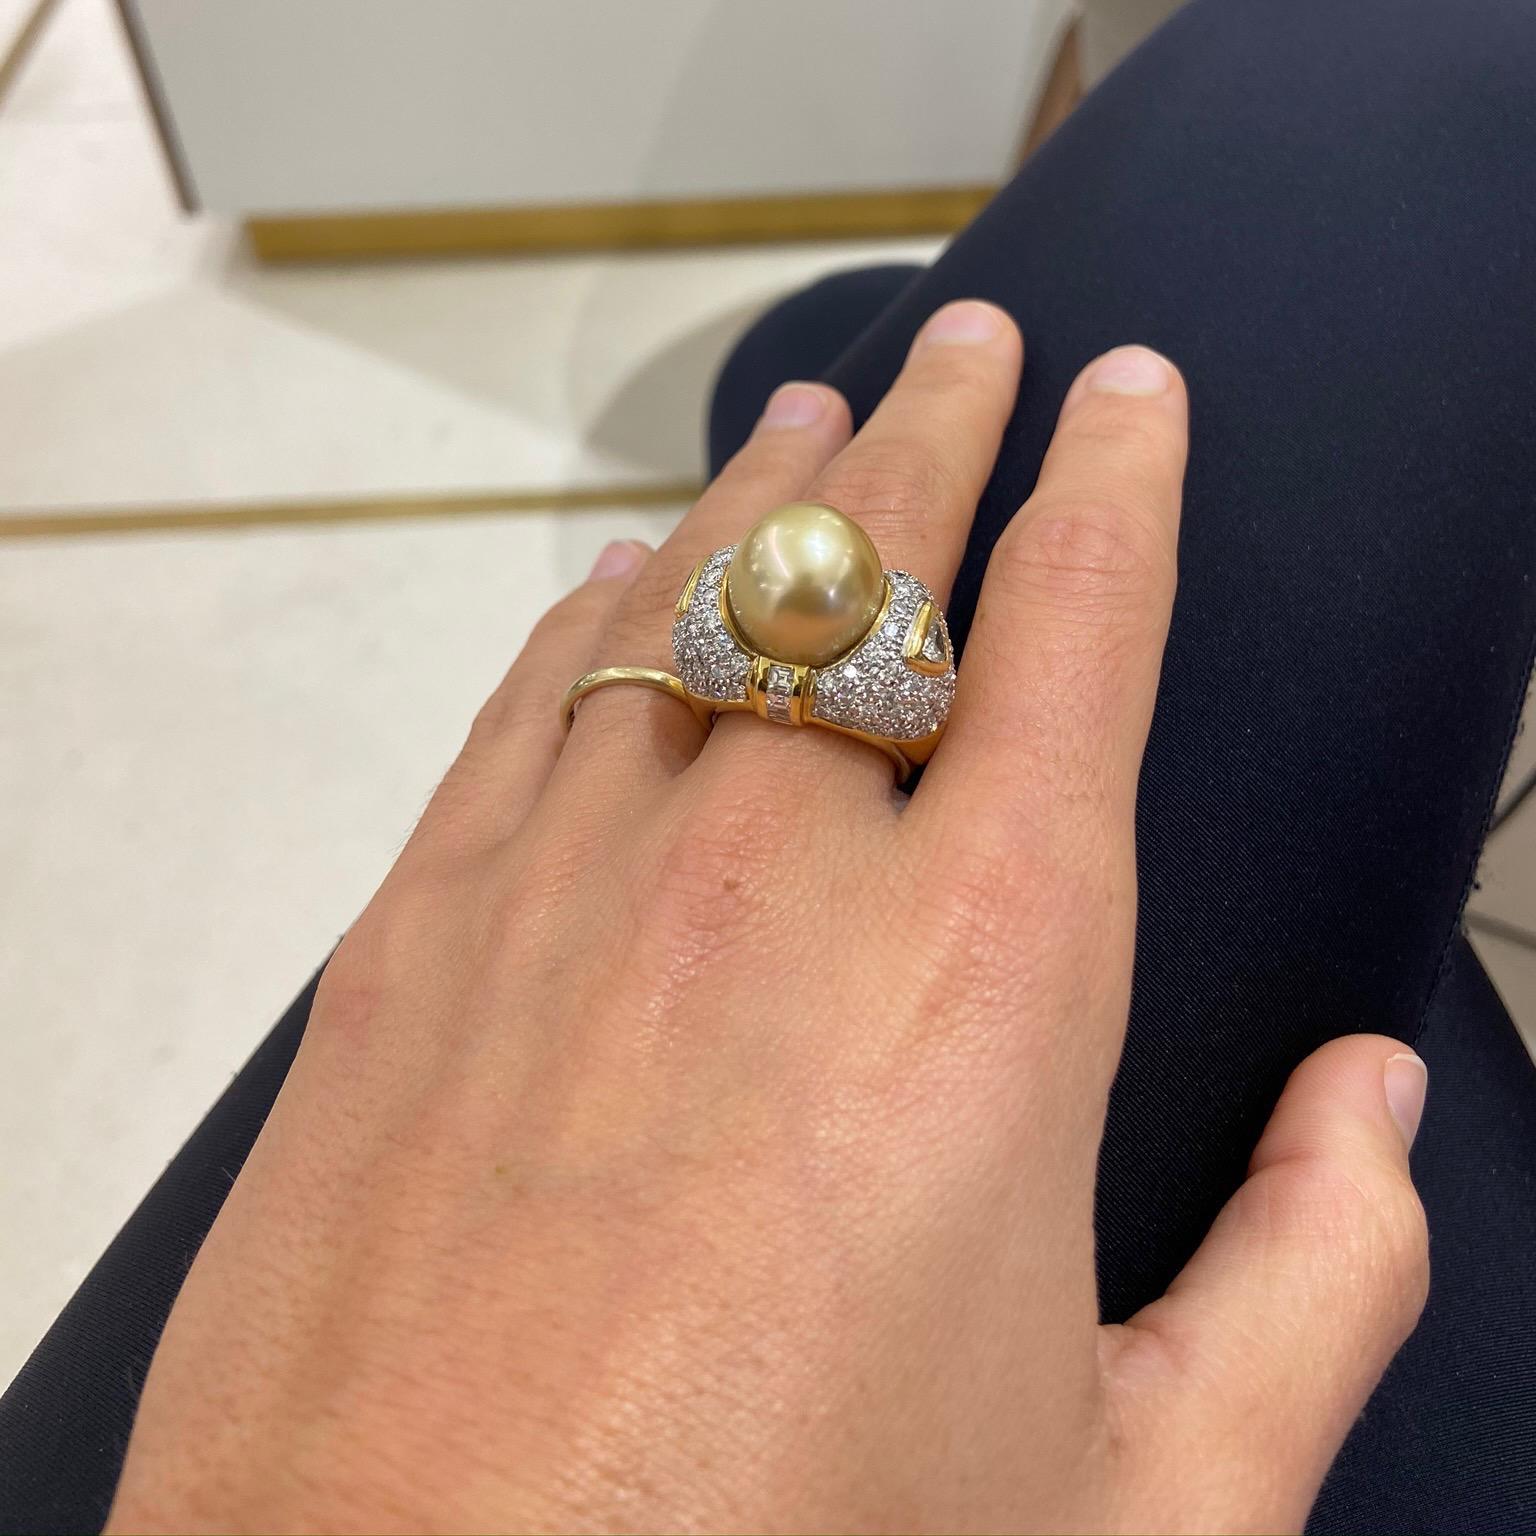 Cellini 18 Karat Yellow Gold, 3.60 Carat Diamond and South Sea Golden Pearl Ring For Sale 2